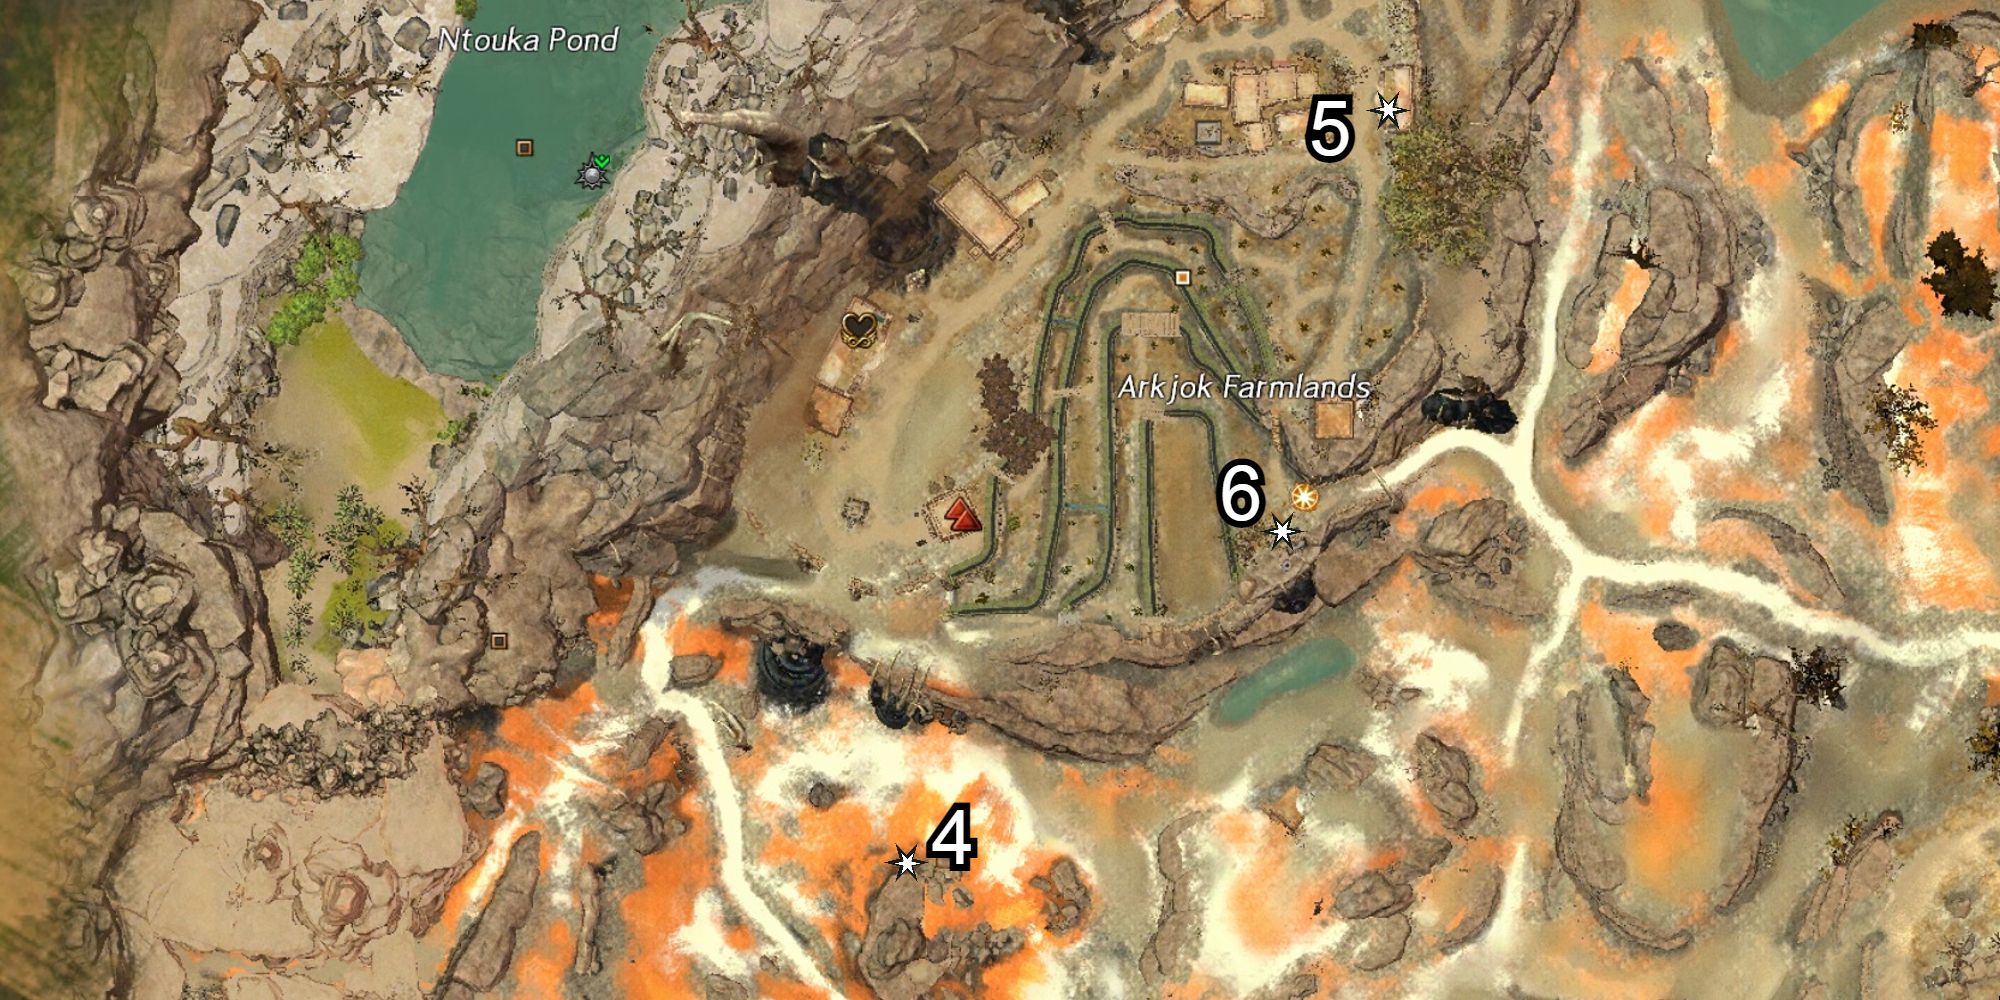 location of beetle juice bottles 4, 5, and 6 on map